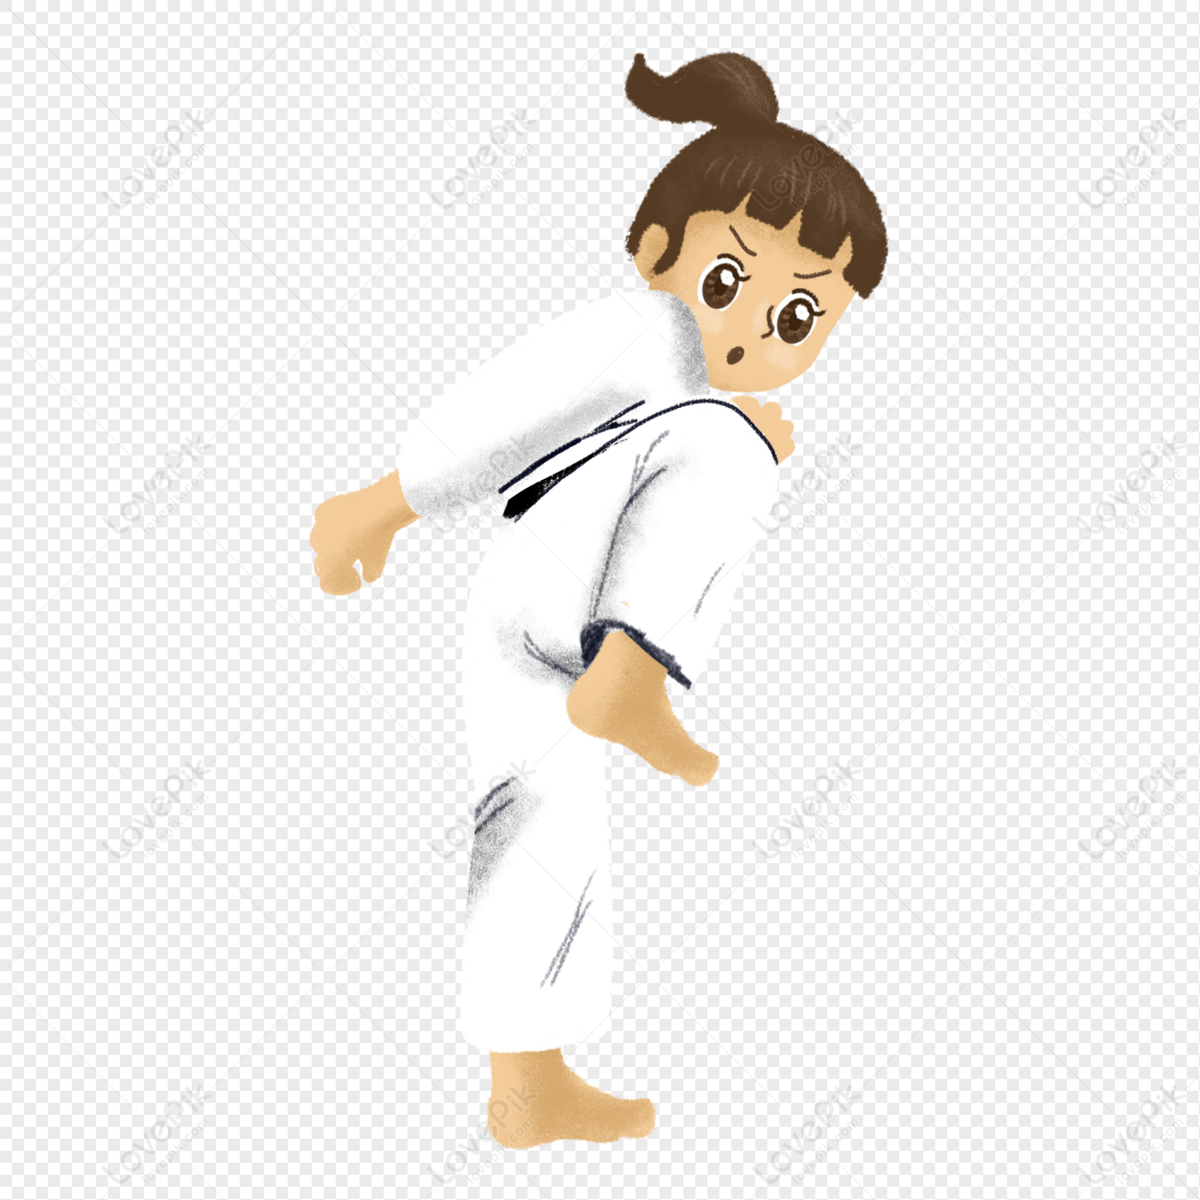 Hand Painted Cartoon Small Fresh Summer Enrollment Taekwondo PNG Hd  Transparent Image And Clipart Image For Free Download - Lovepik | 401559714